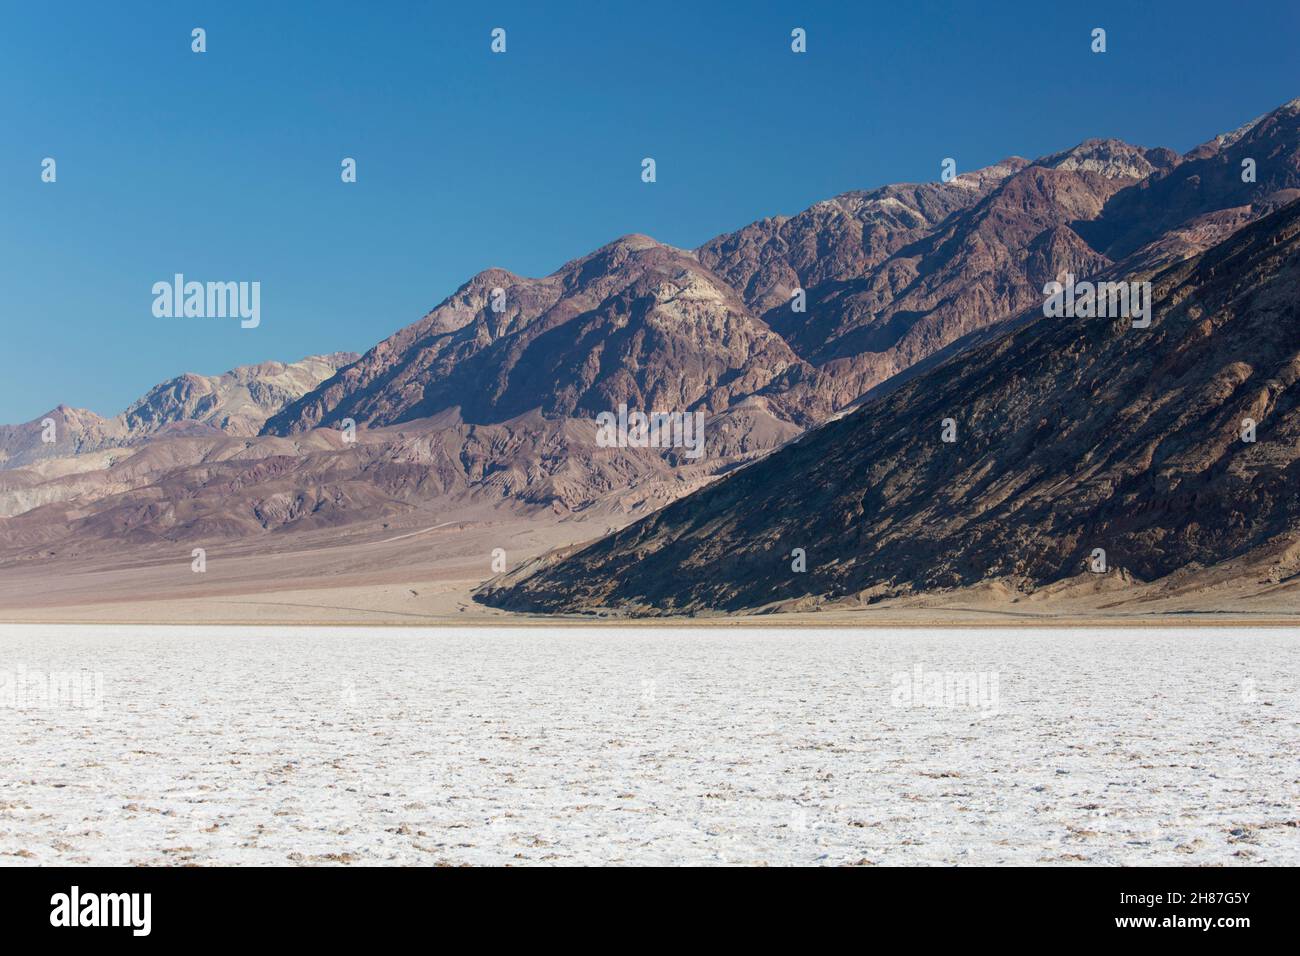 Death Valley National Park, California, USA. View across the vast expanse of salt flats at Badwater Basin to the western slopes of the Amargosa Range. Stock Photo